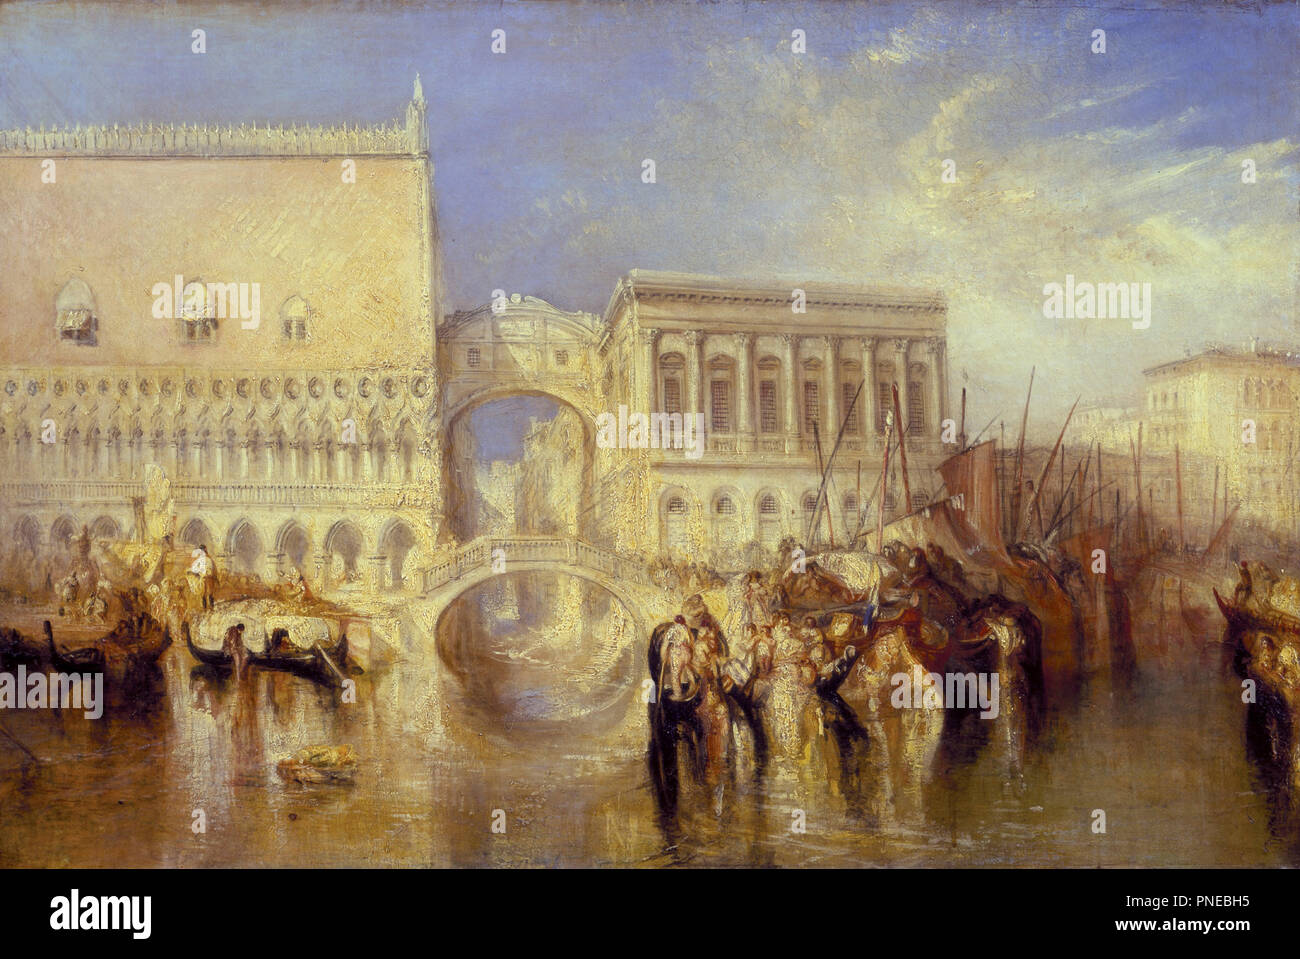 Venice, the Bridge of Sighs. Date/Period: 1840. Painting. Oil on canvas. Height: 686 cm (22.5 ft); Width: 914 cm (29.9 ft). Author: J. M. W. Turner. Stock Photo